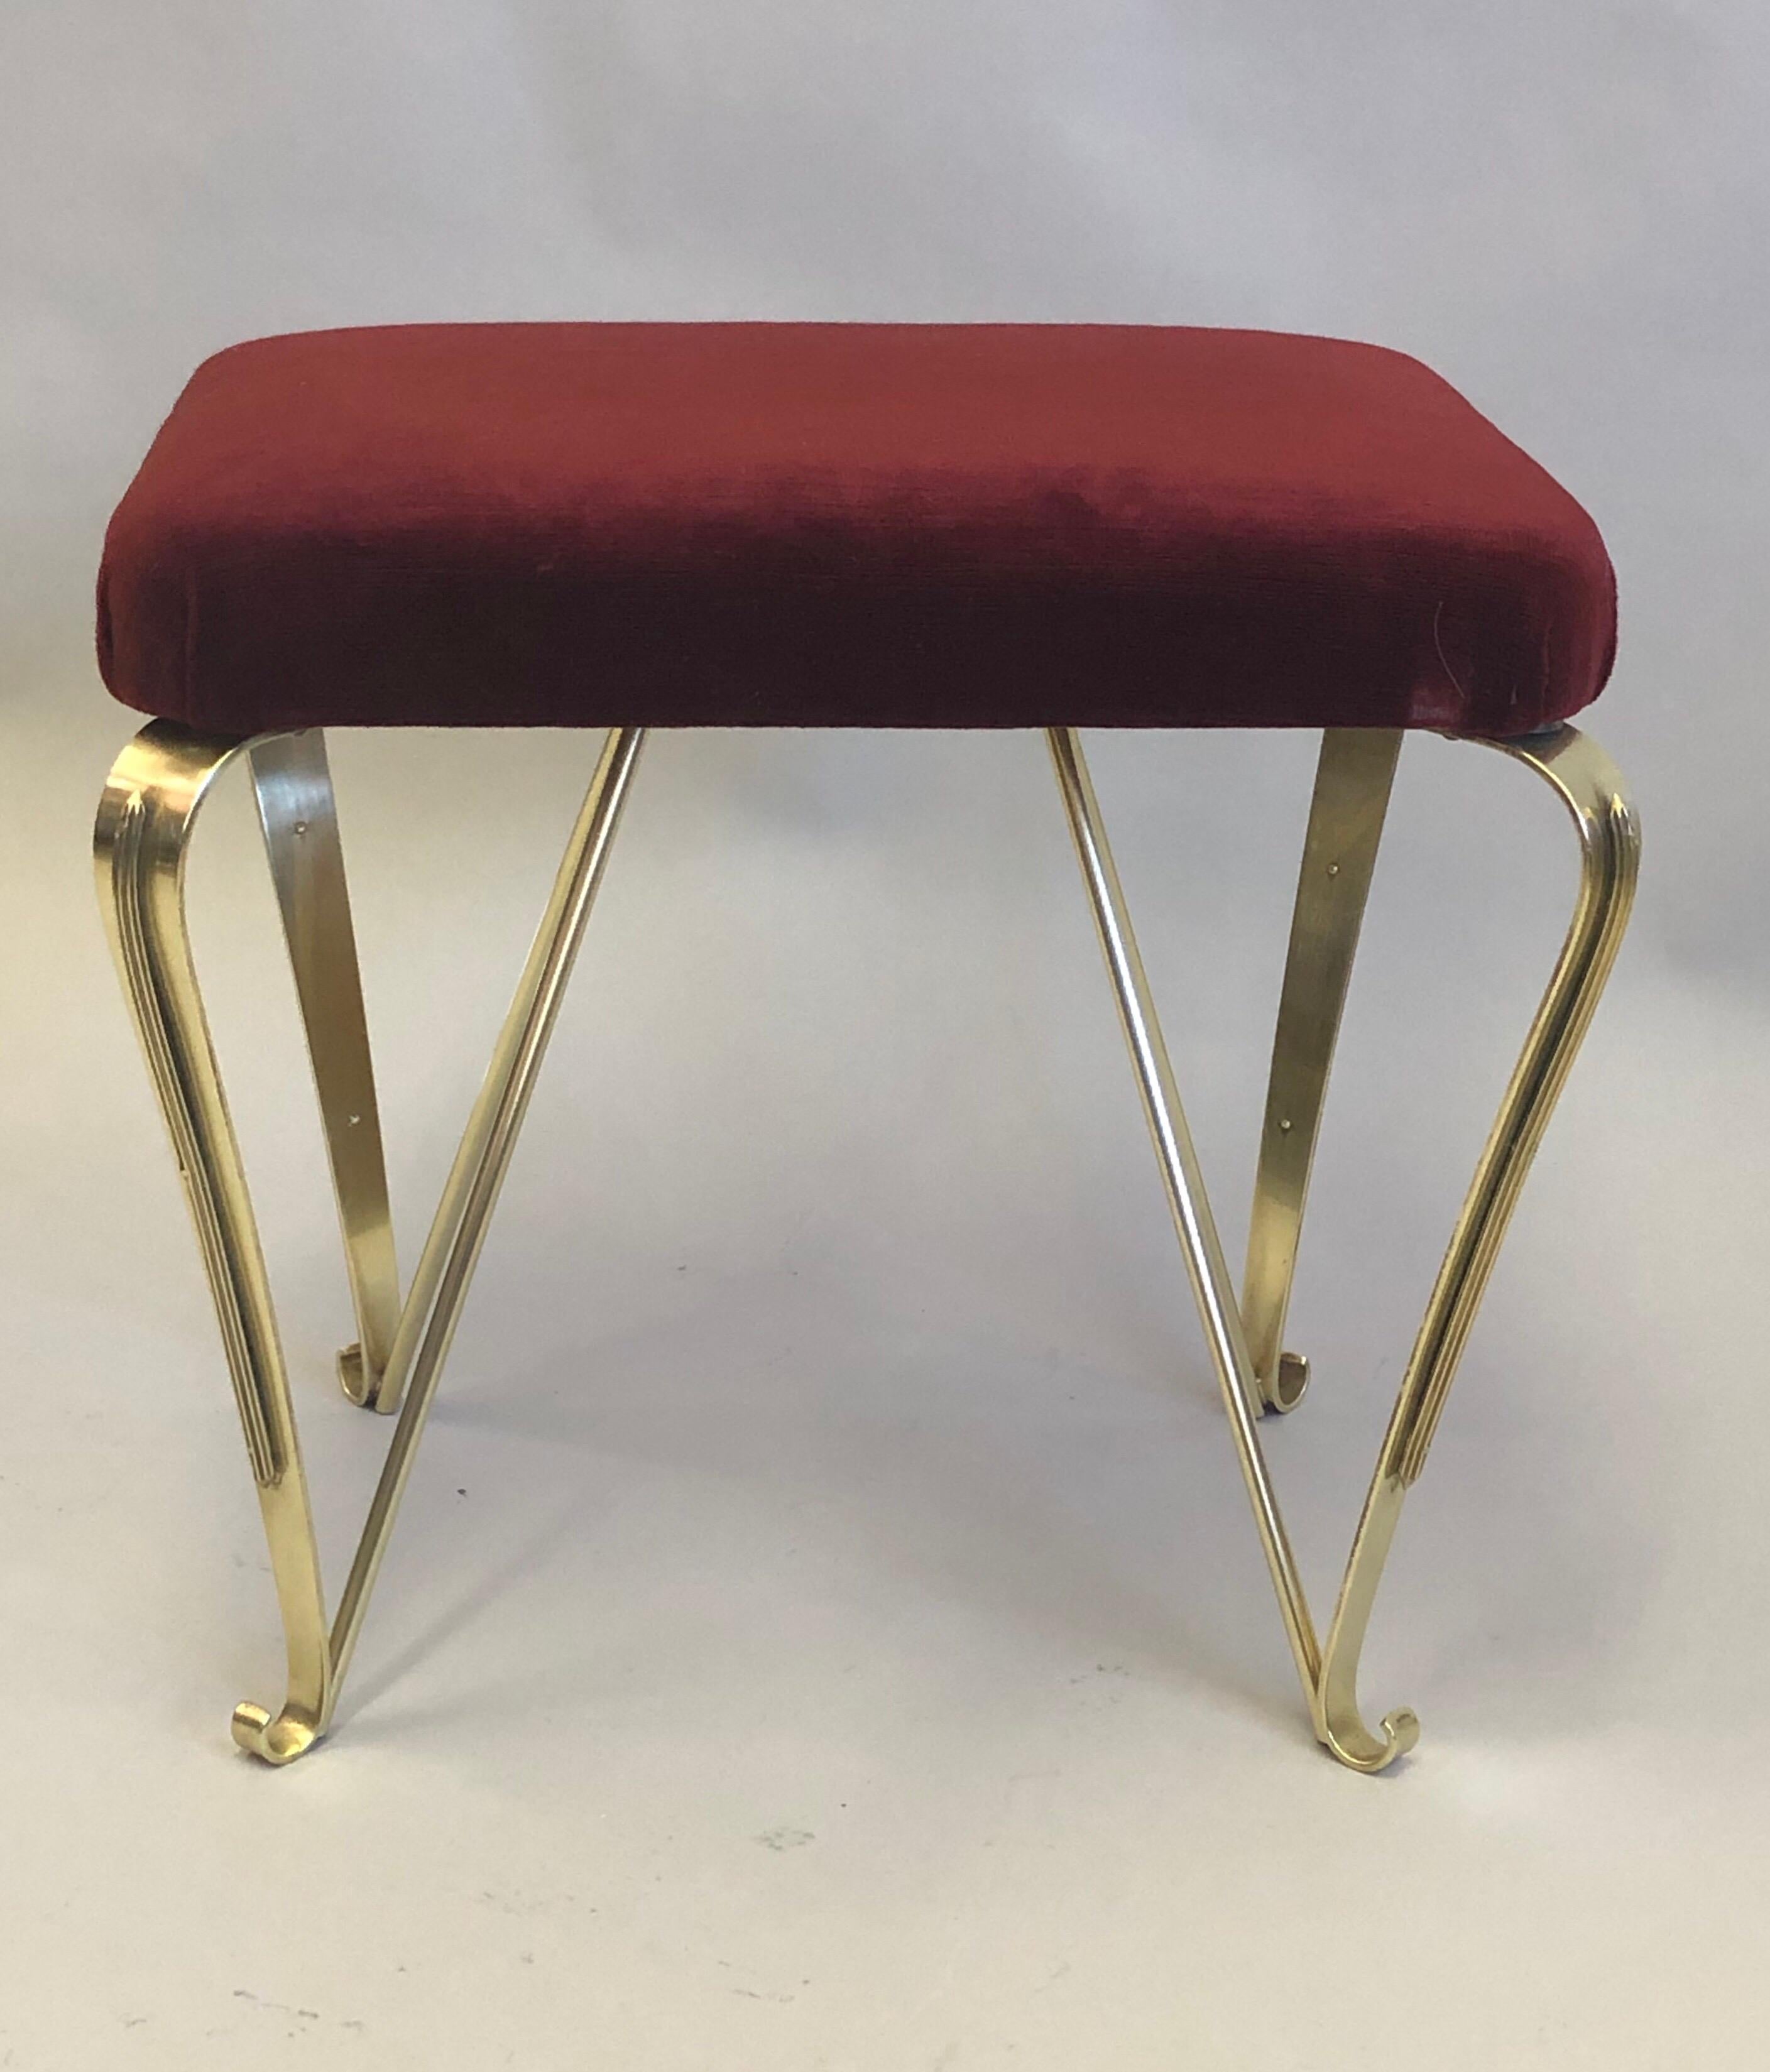 Pair of Italian Mid-Century Modern Neoclassical Solid Brass Benches by Jansen For Sale 4